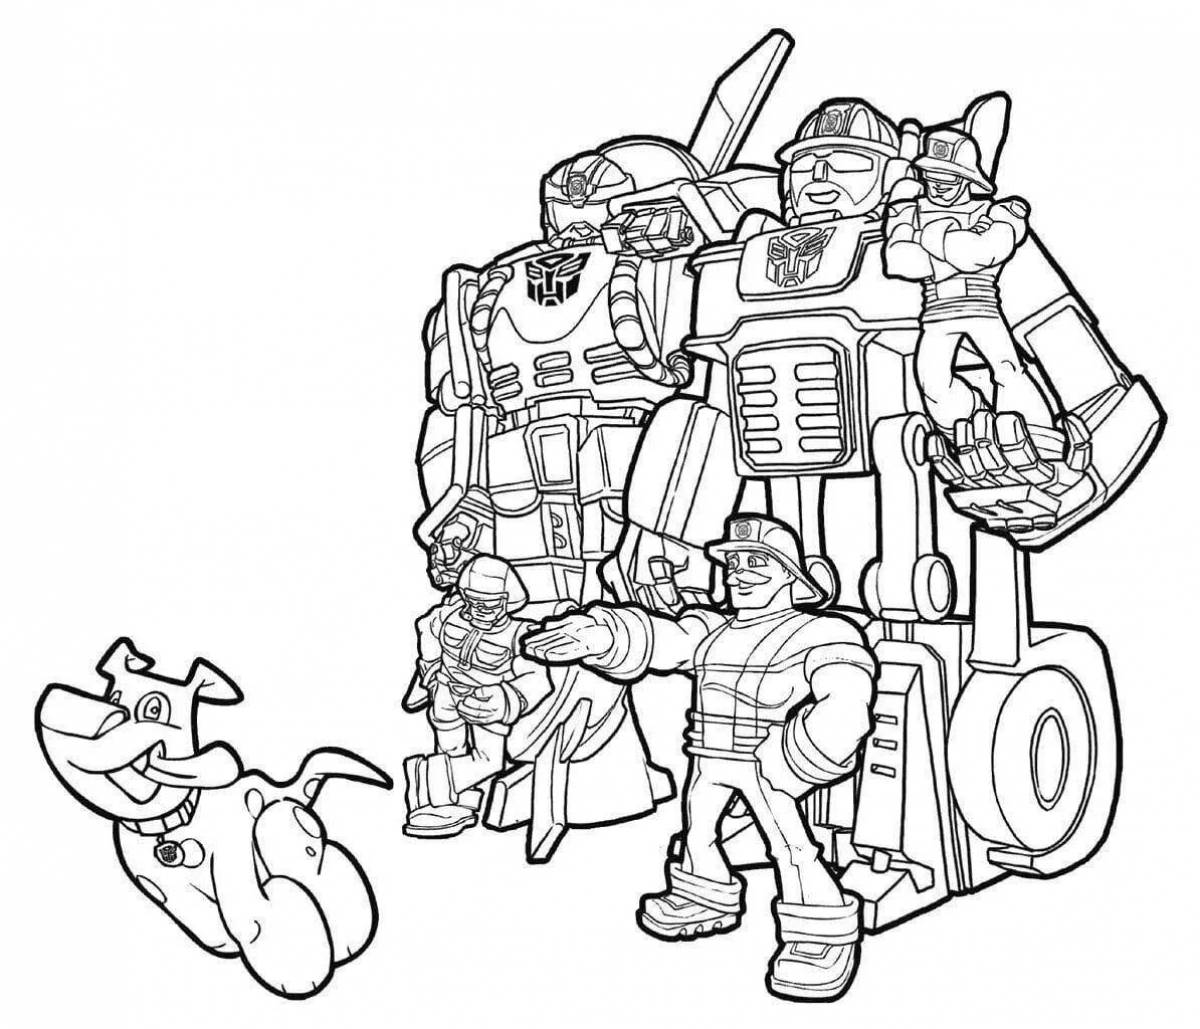 Animated fire robot coloring page